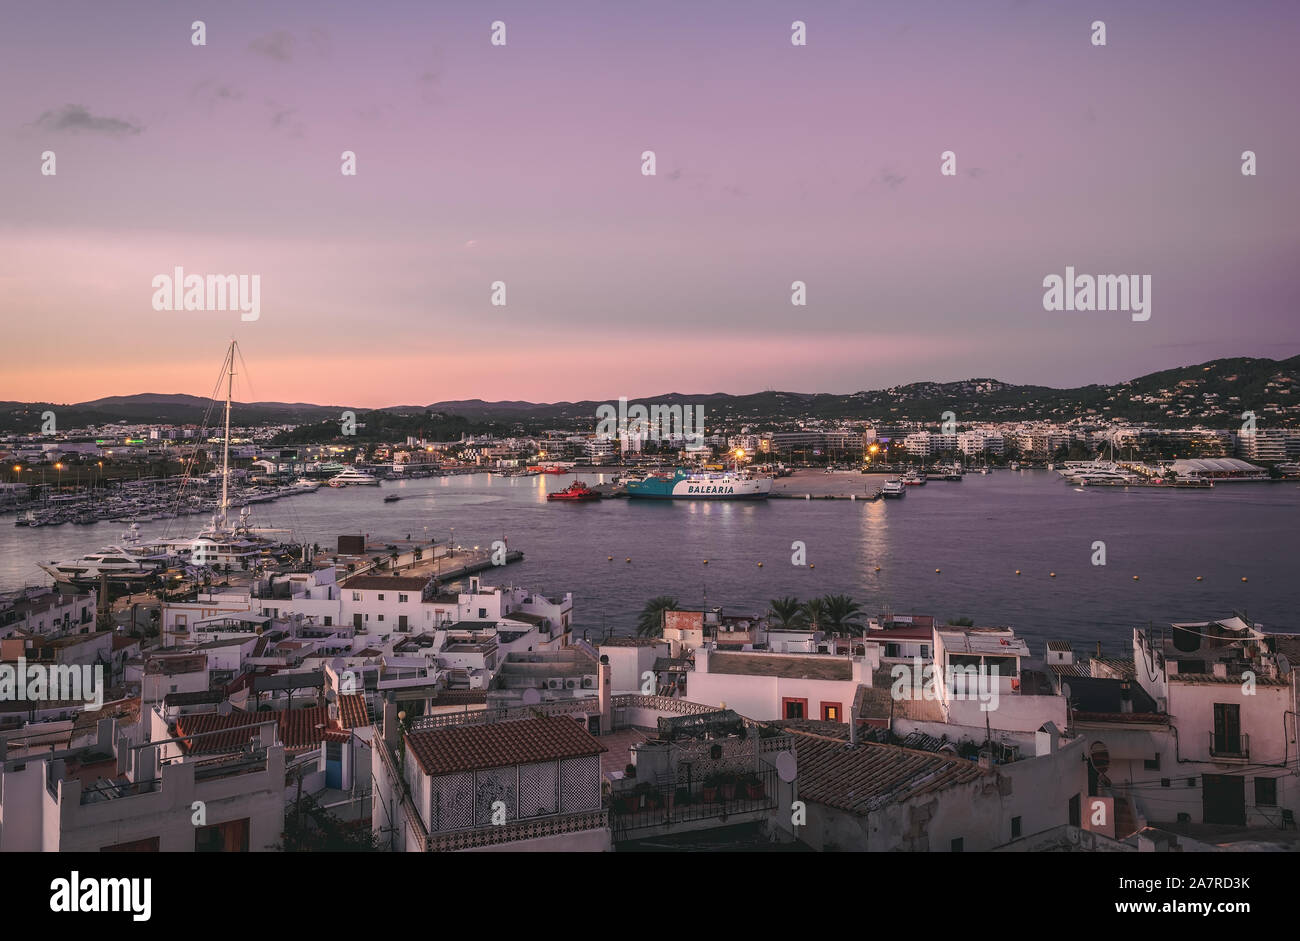 beautiful sunset in the historic area of Dalt Vila in Ibiza,Balearics,Spain.Cathedral and white houses in the wall area Stock Photo